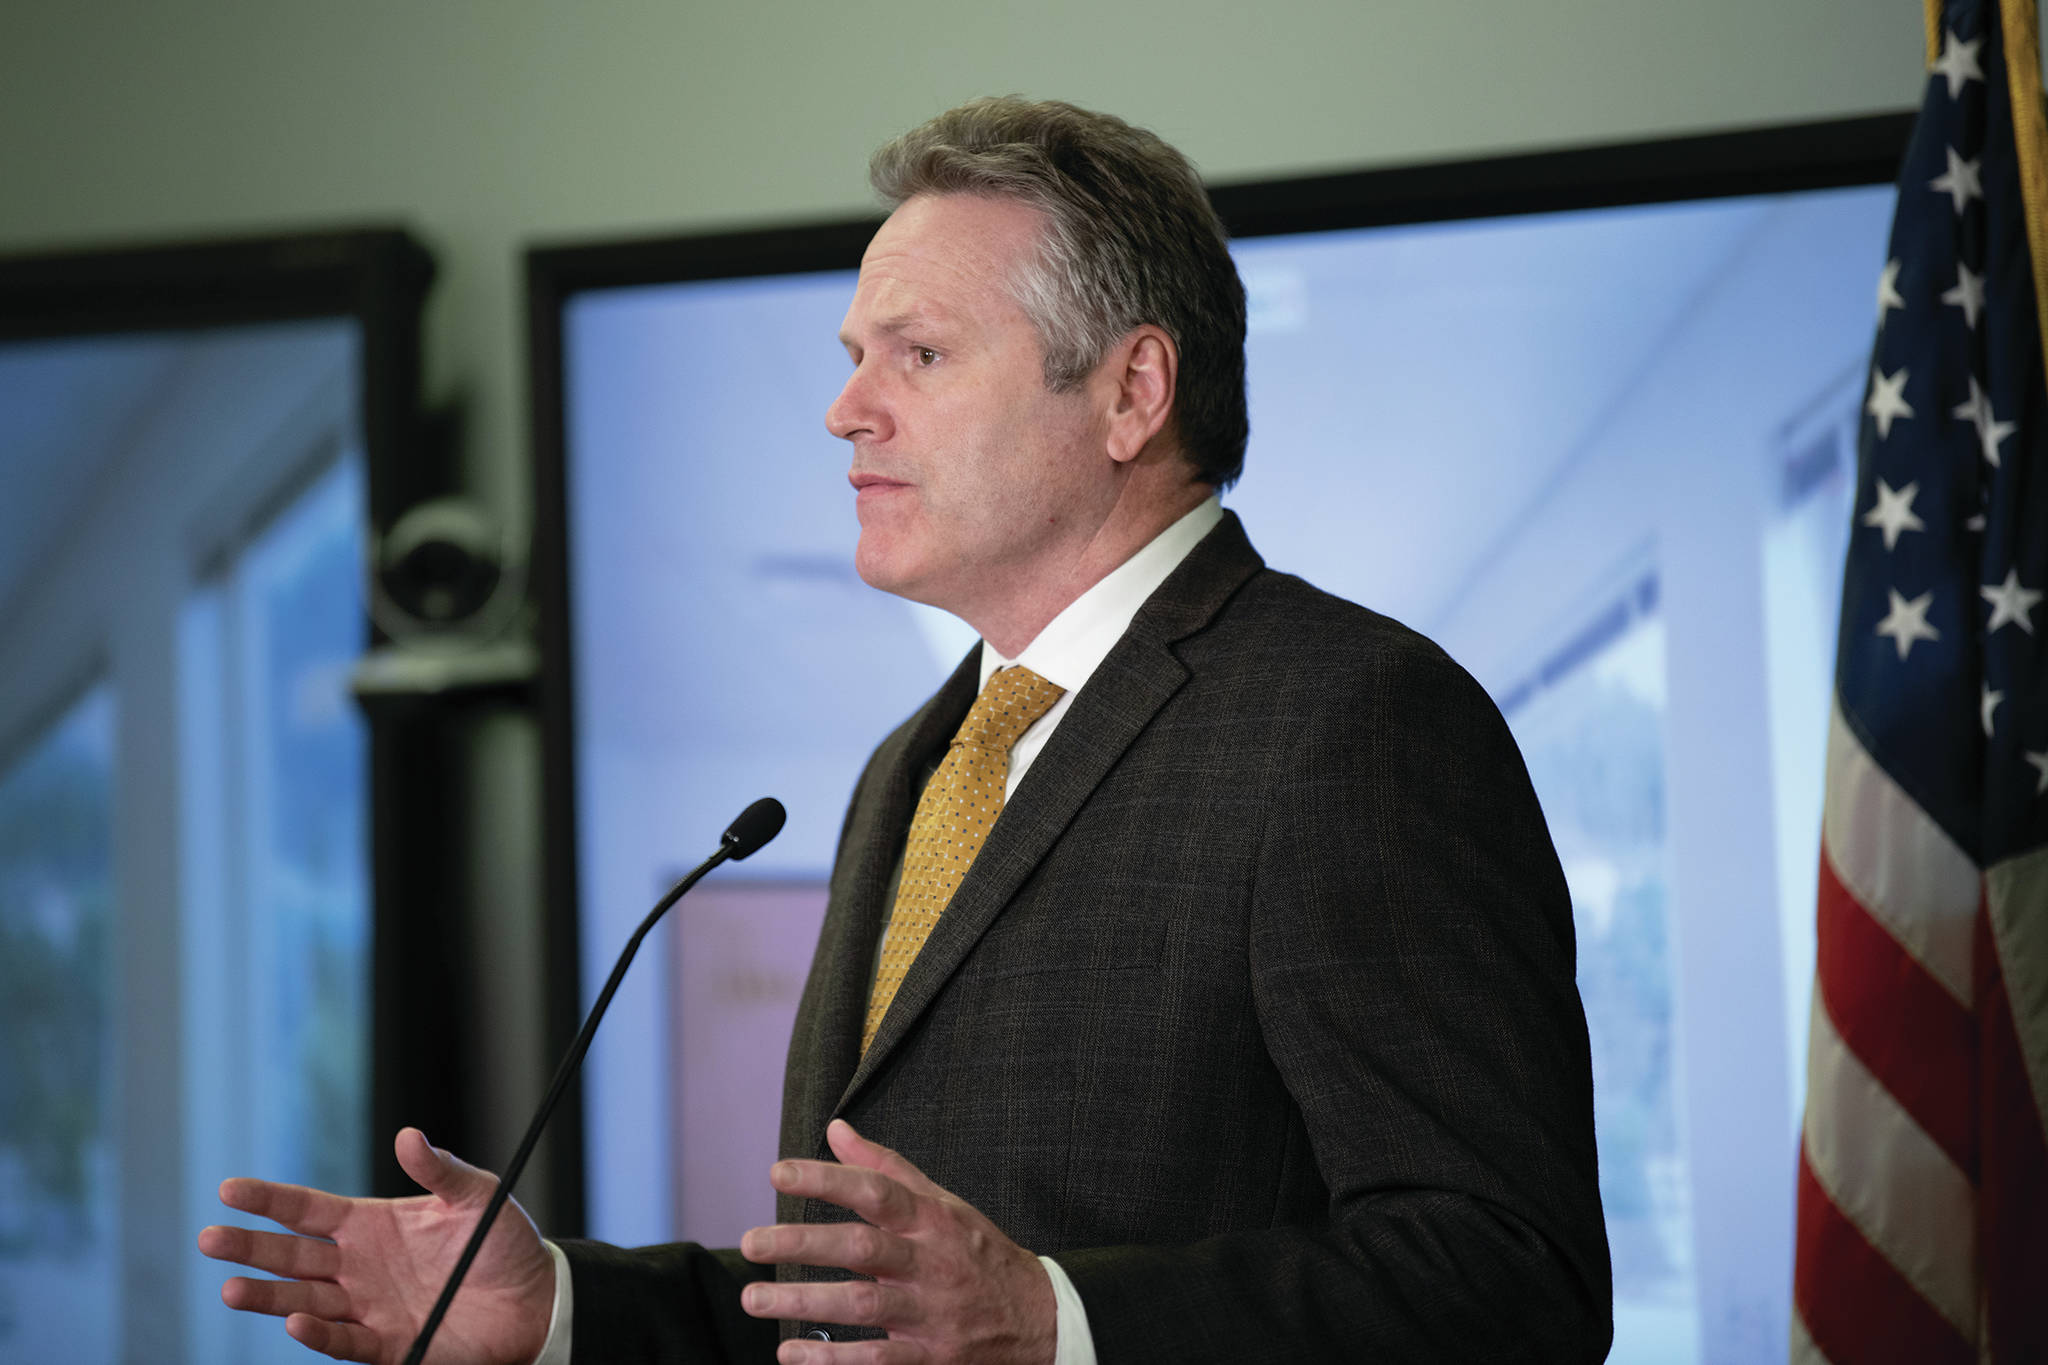 Gov. Mike Dunleavy speaks at a press conference on the budget on April 7, 2020, in Juneau, Alaska. He later met with reporters to speak about 22 new COVID-19 cases reported on Tuesday. (Photo by Austin McDaniel/Office of the Governor)